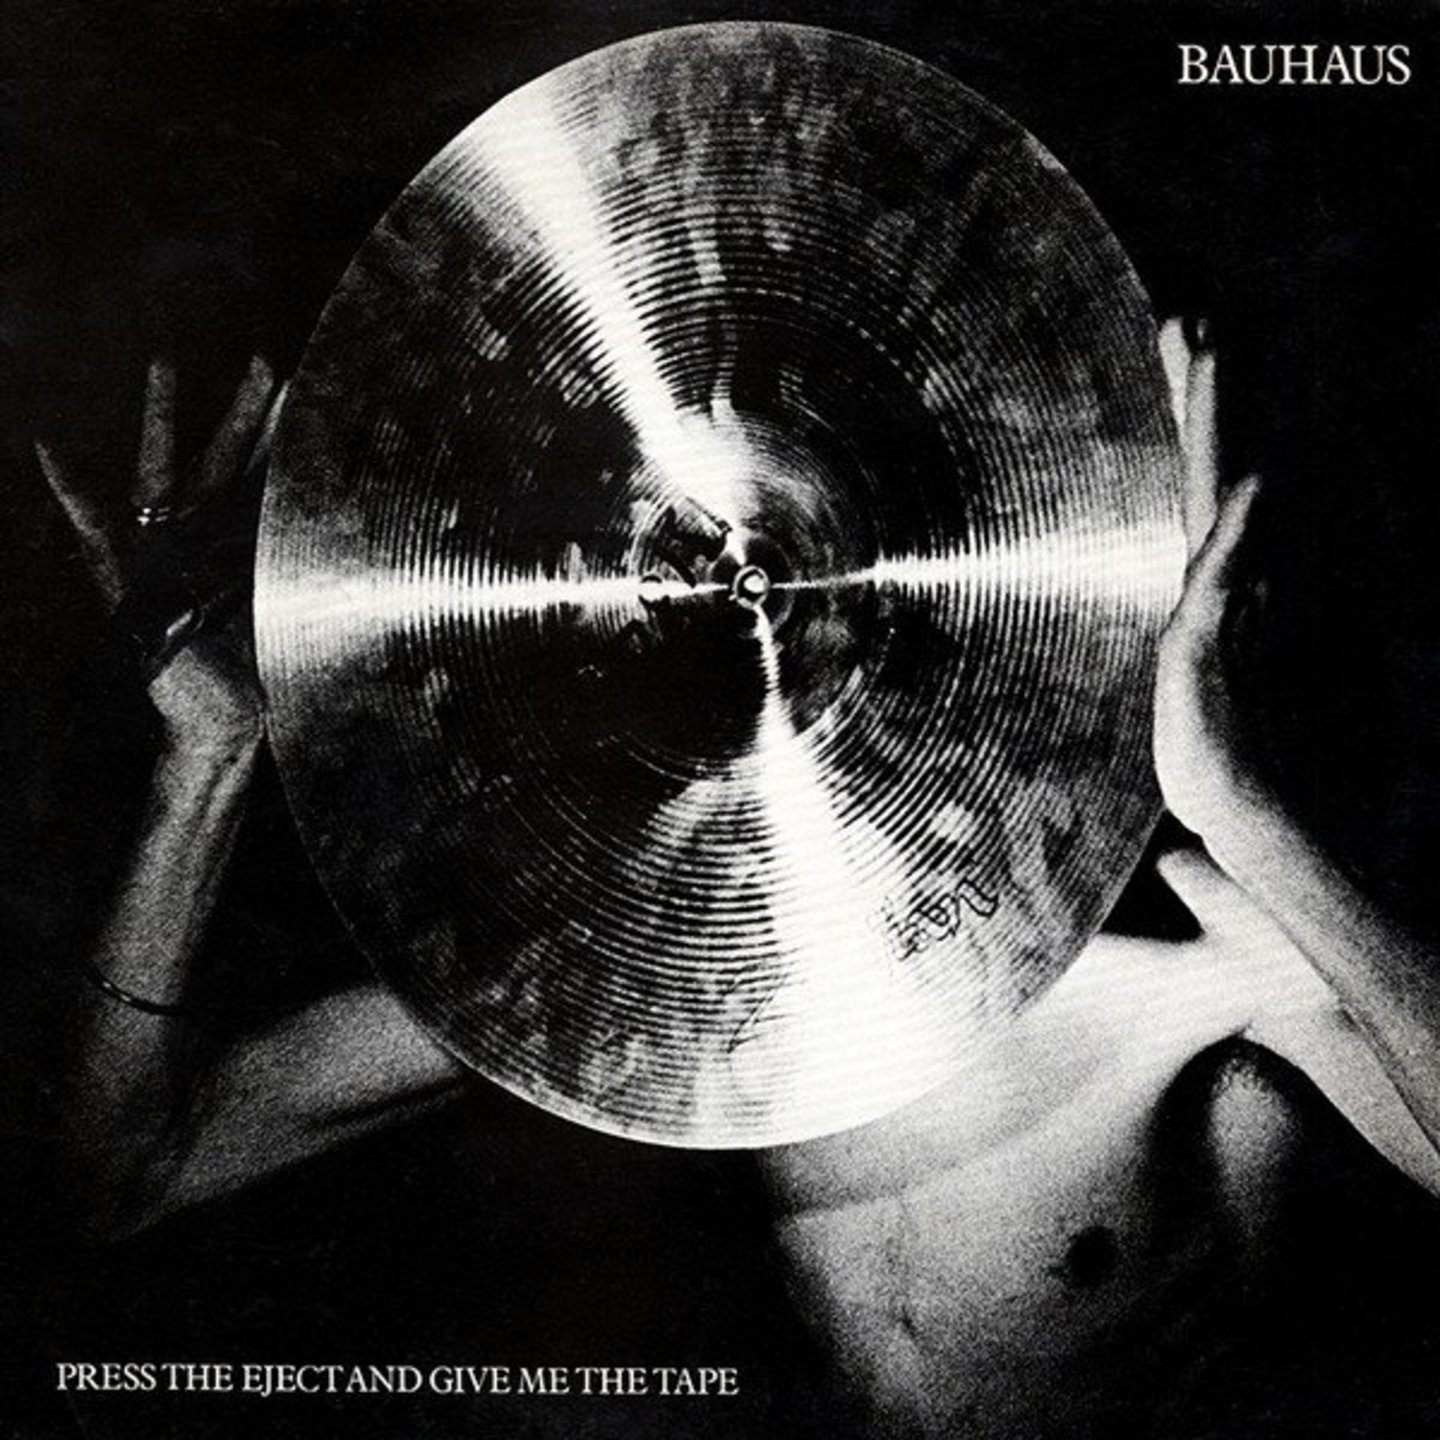 BAUHAUS - Press The Eject And Give Me The Tape LP White vinyl